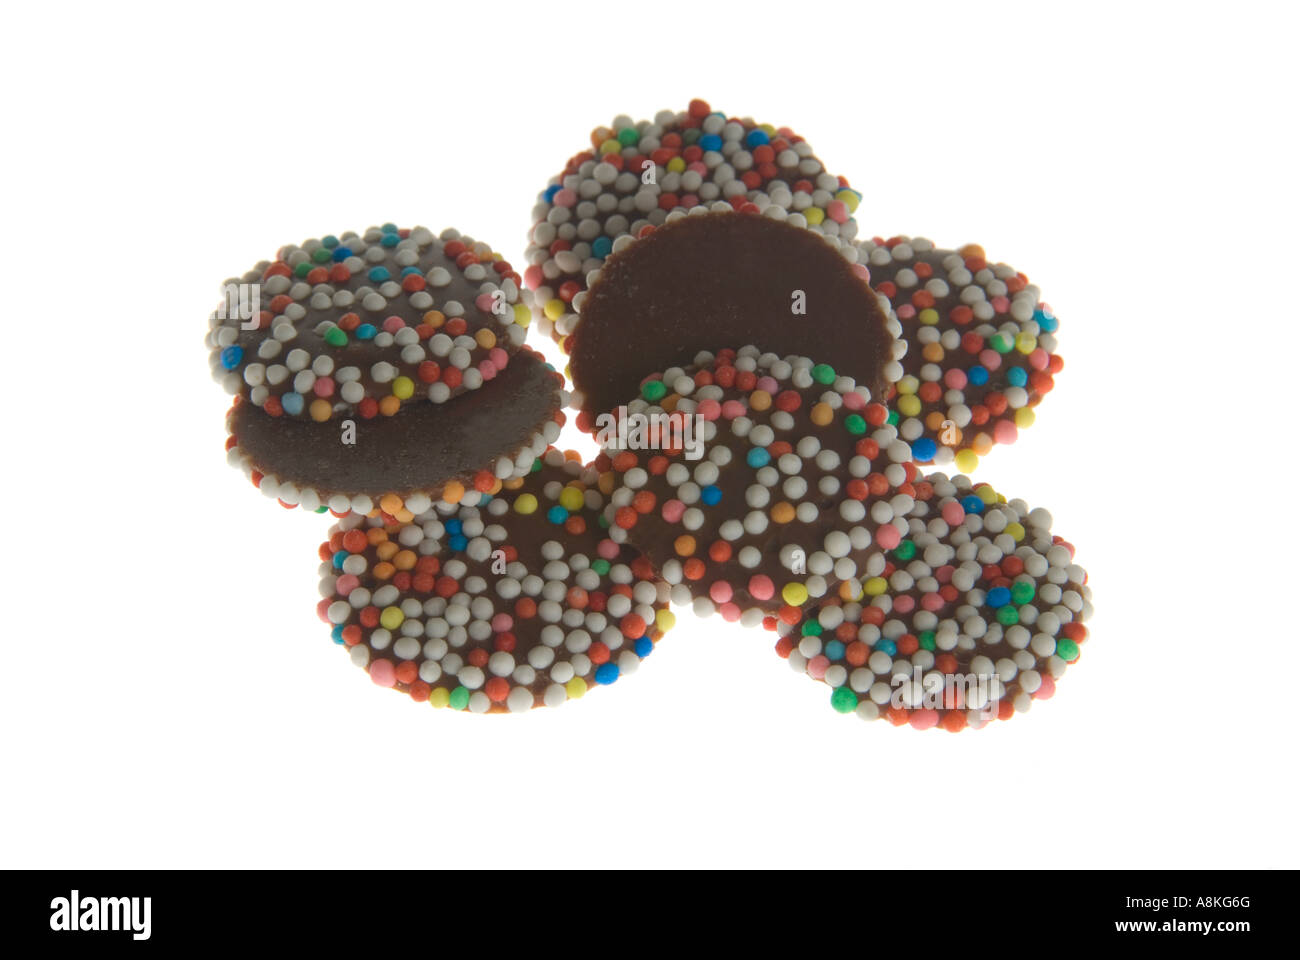 Horizontal close up of a pile of milk chocolate buttons on a white background. Stock Photo